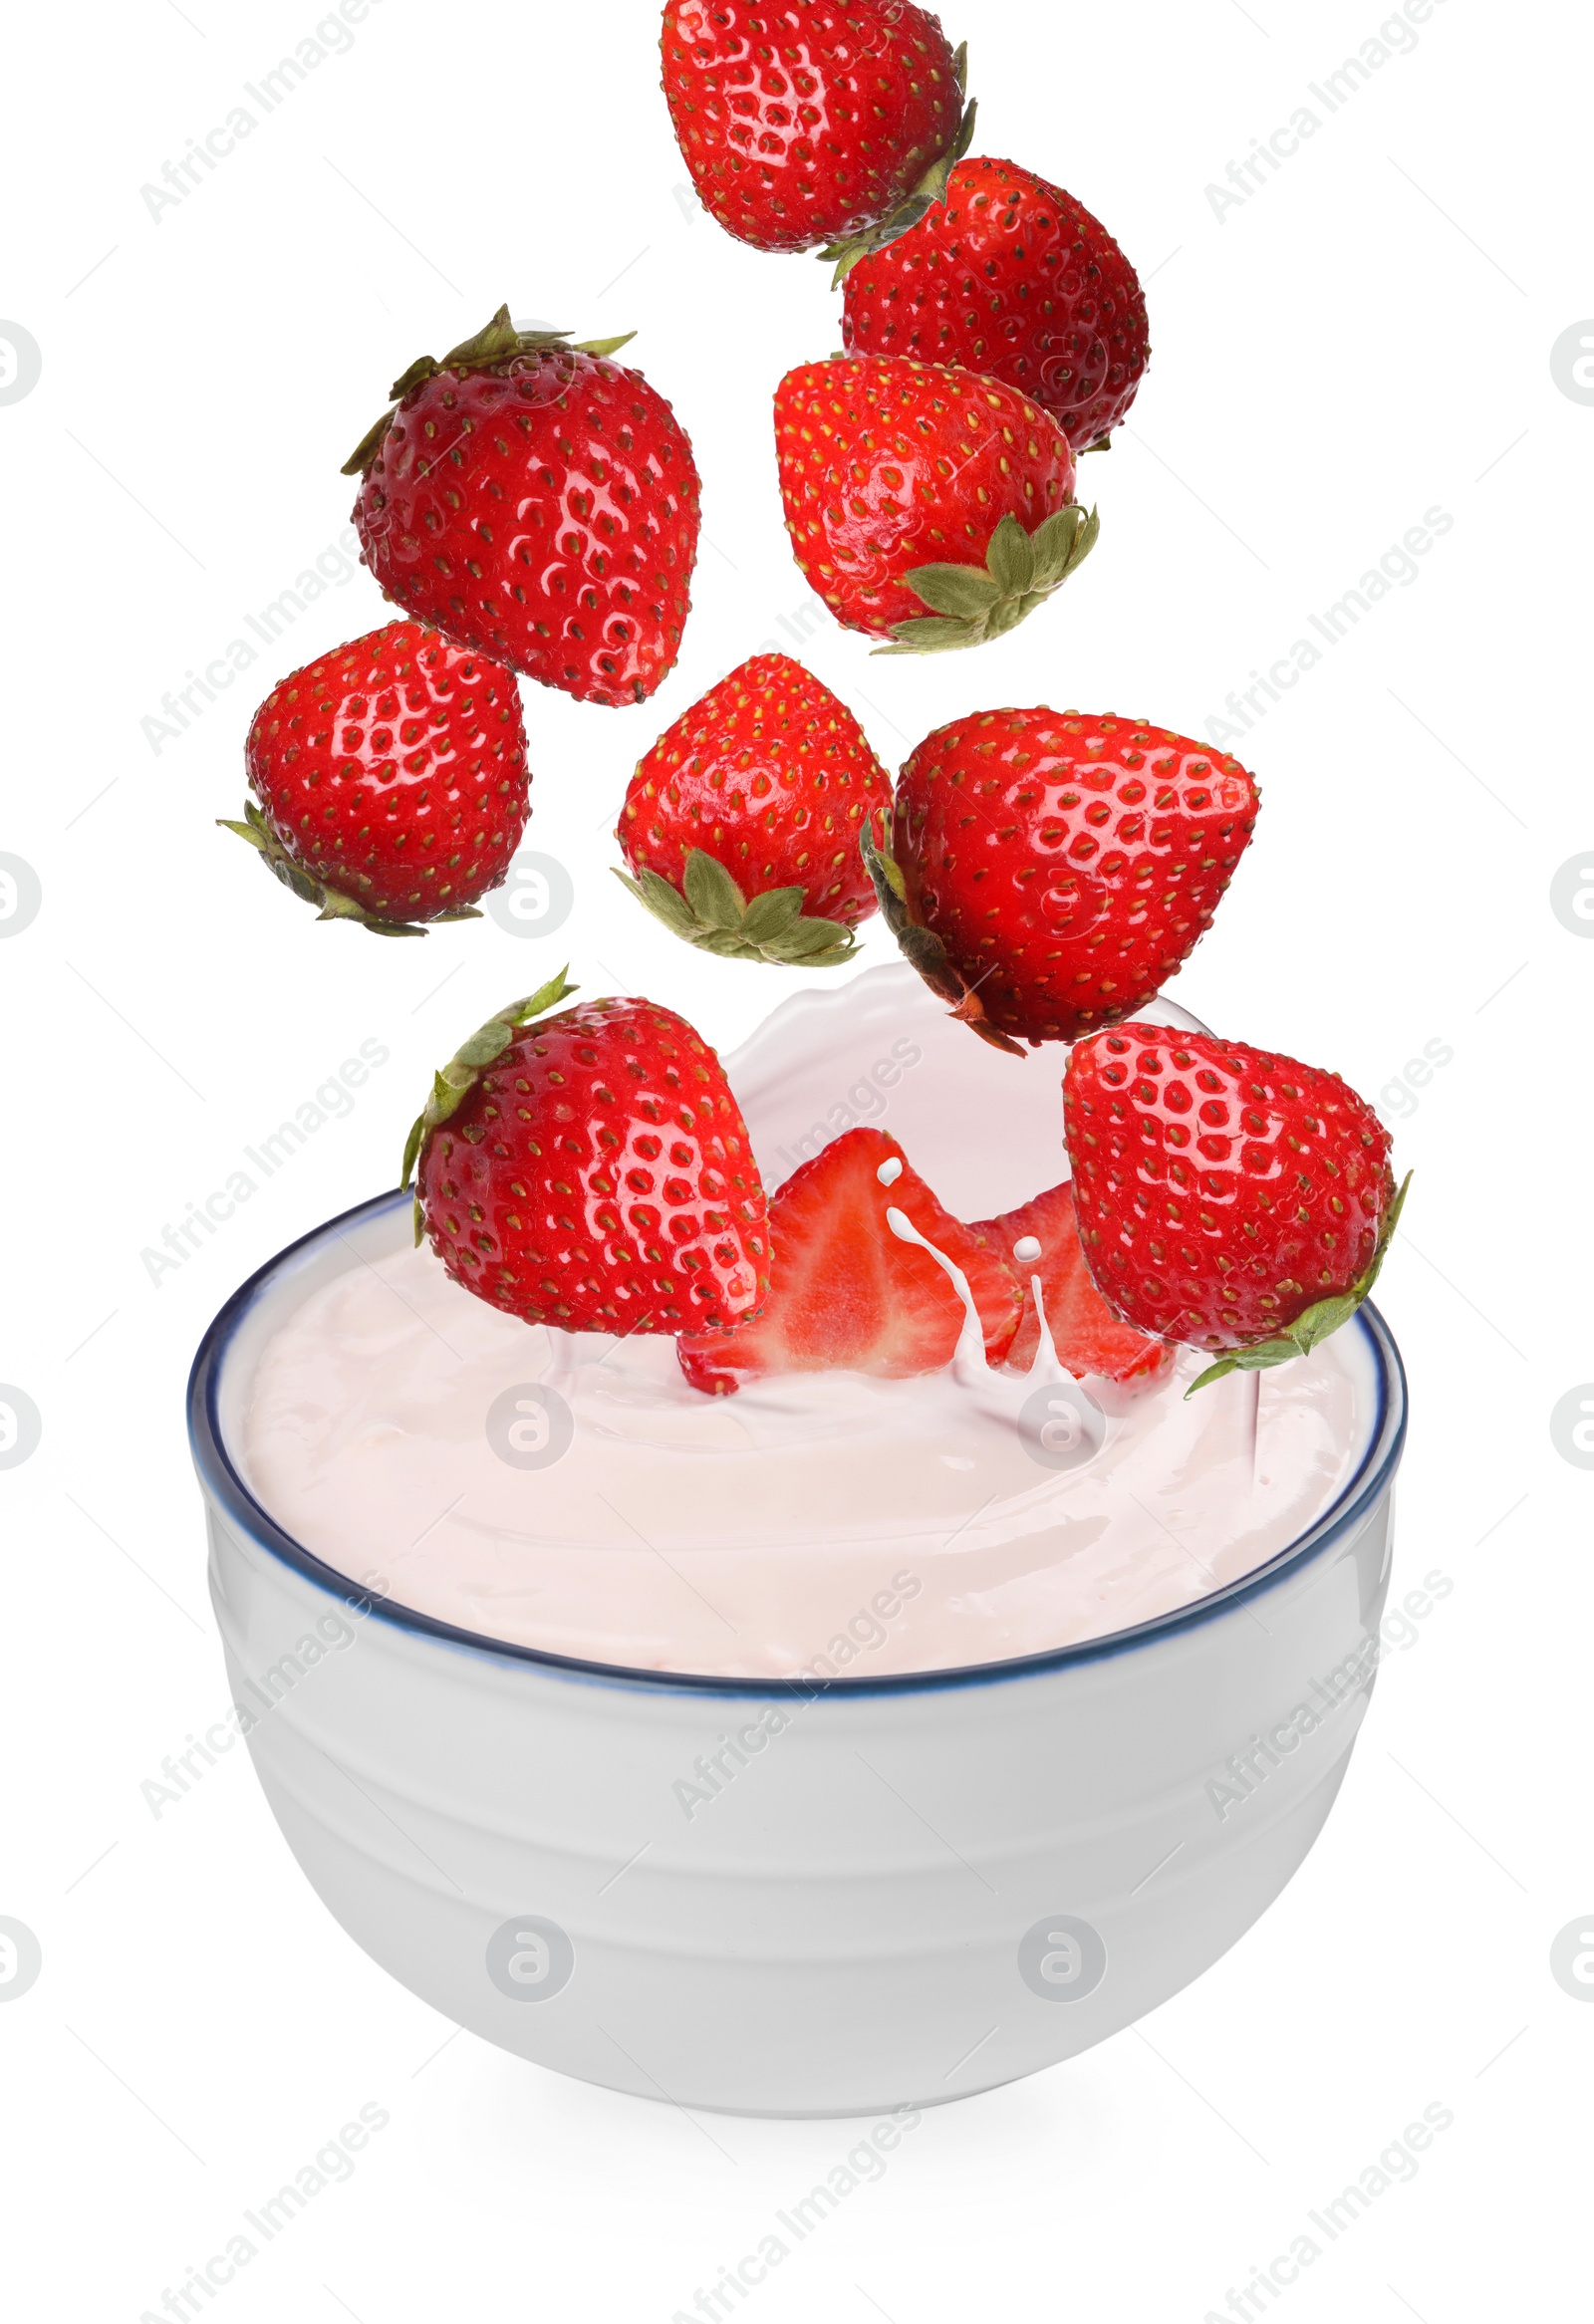 Image of Delicious ripe strawberries falling into bowl with yogurt on white background